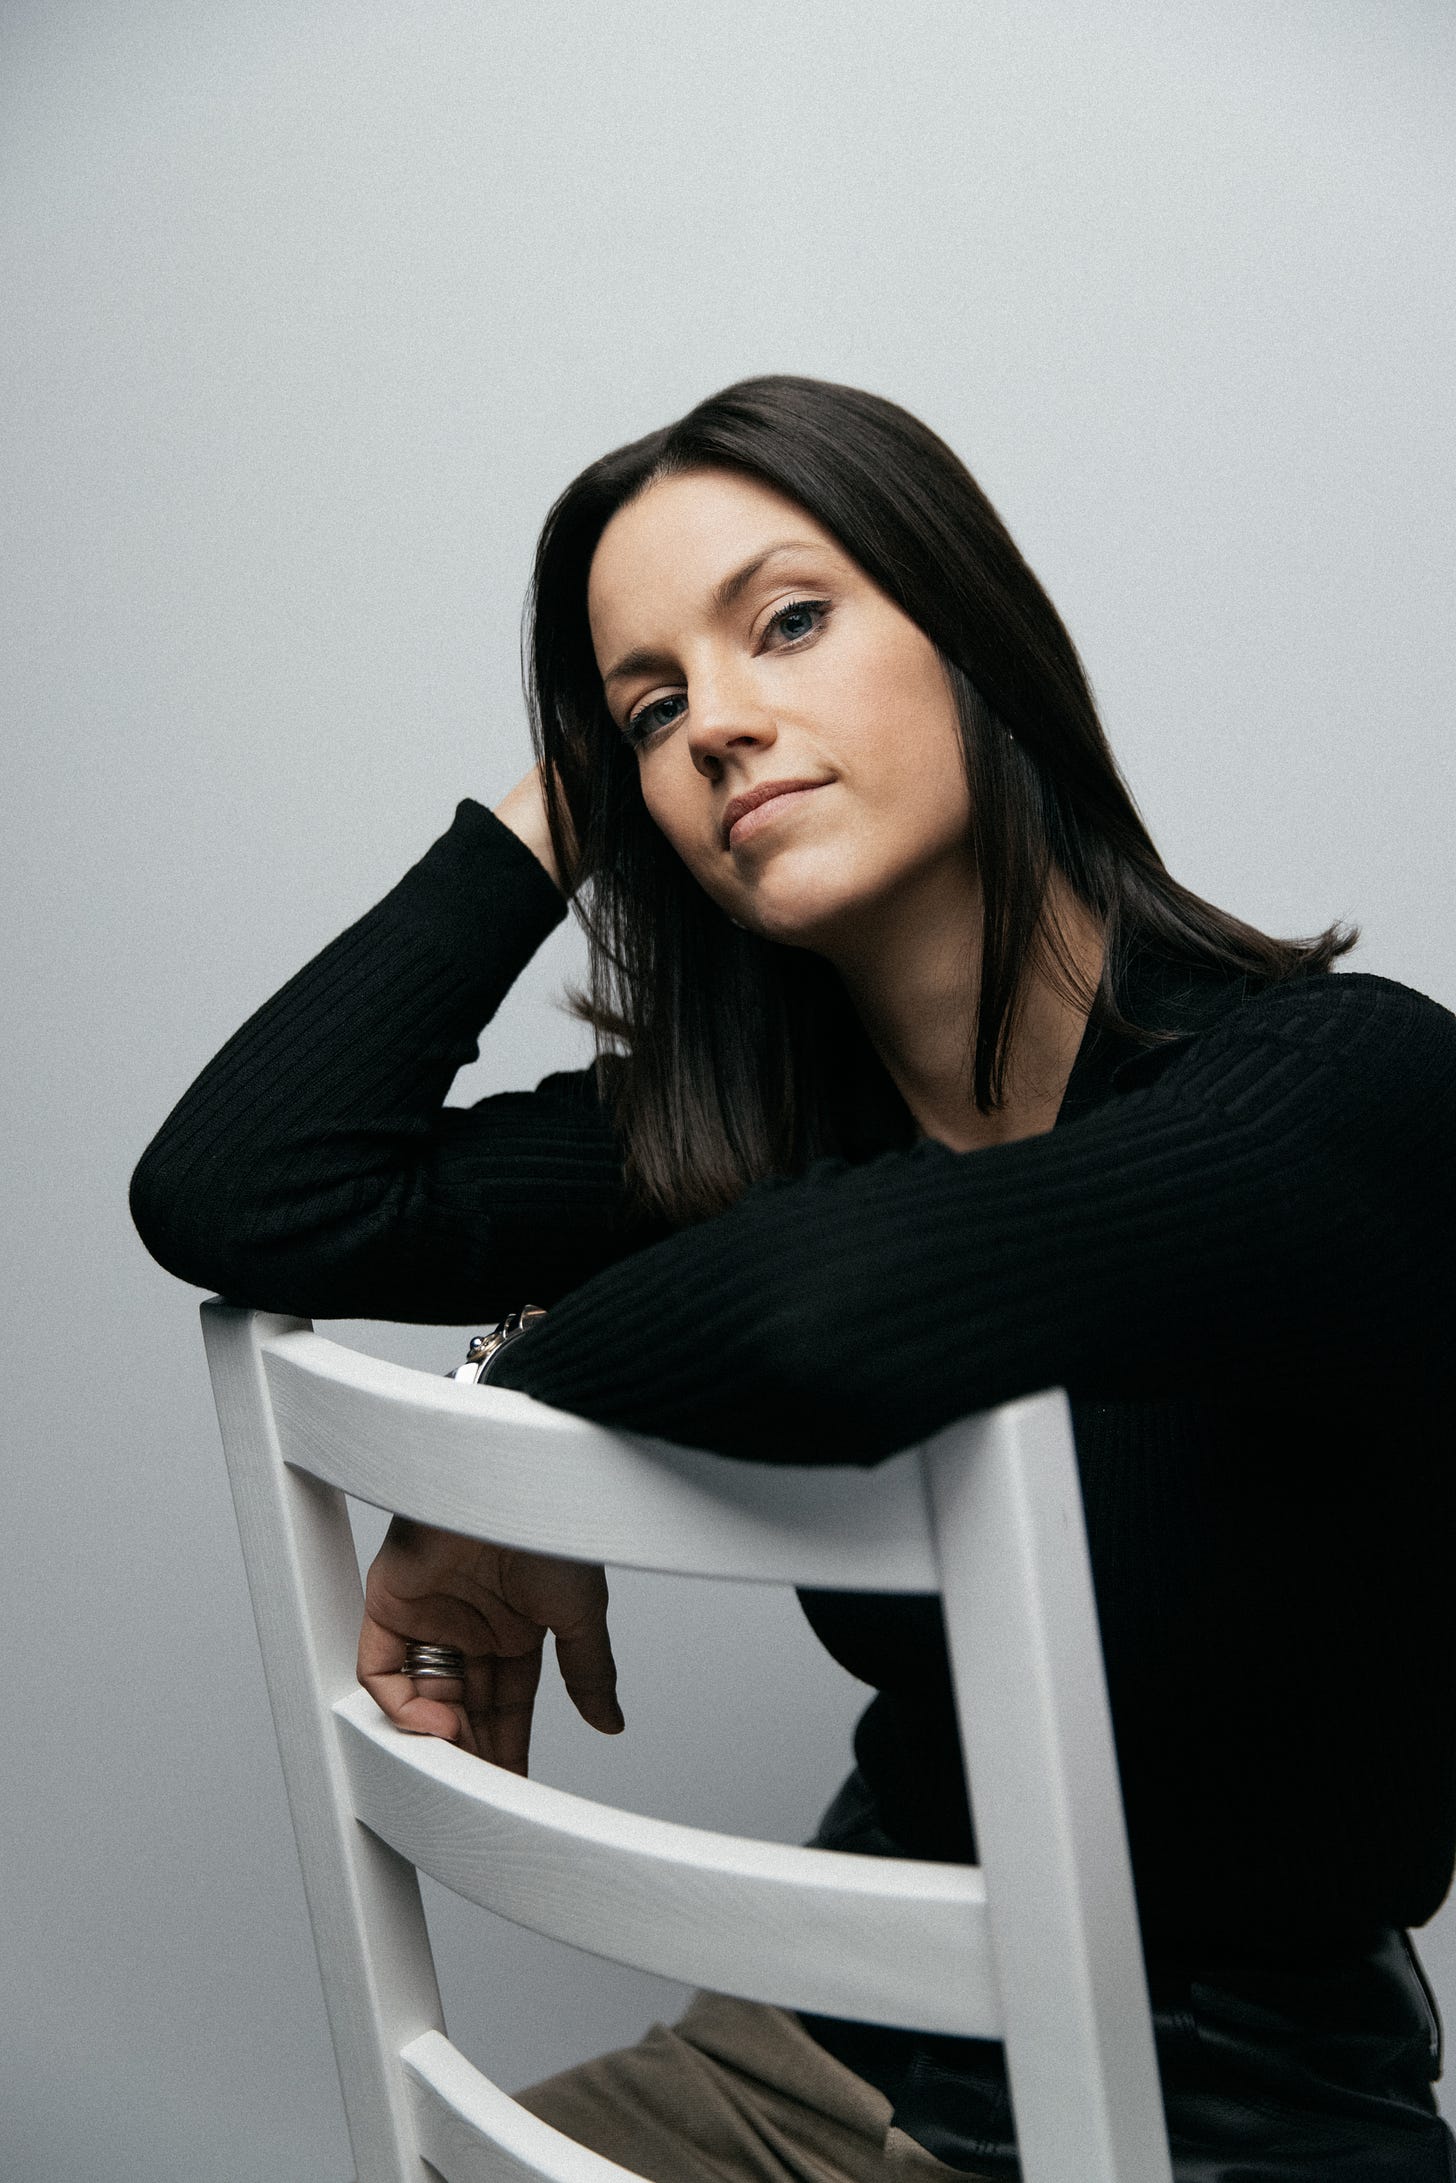 Portrait of marketer Julianne Fraser. She is wearing a black long-sleeved top and is sitting in front of a white background on a white chair.